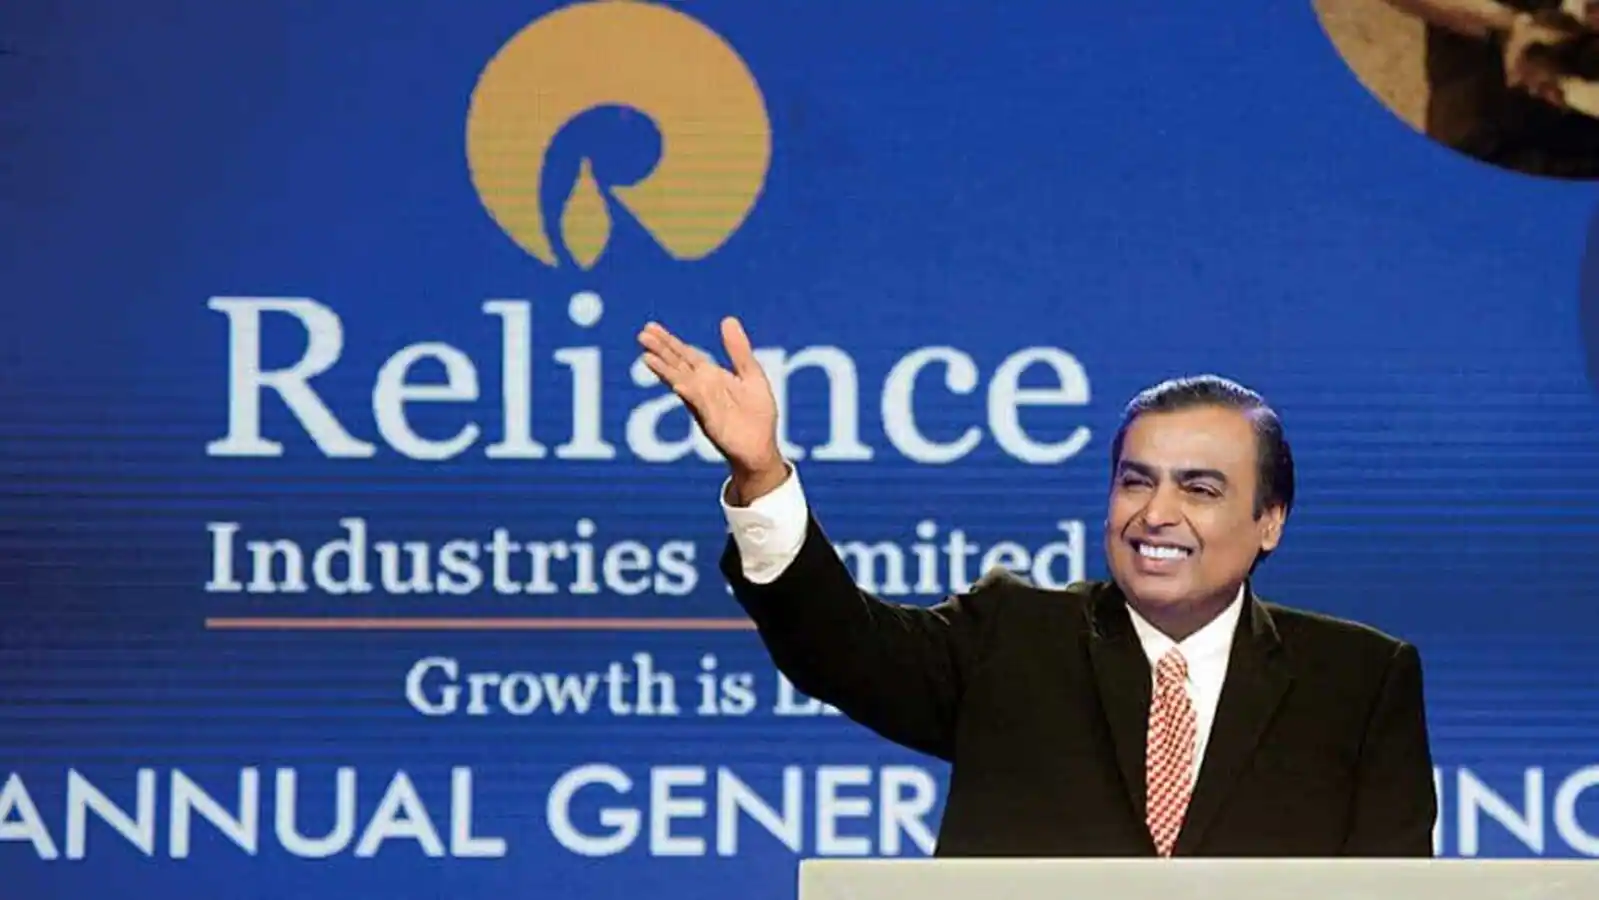 Ambani's Visionary Leadership Driving Reliance Industries' Remarkable Growth and Impact